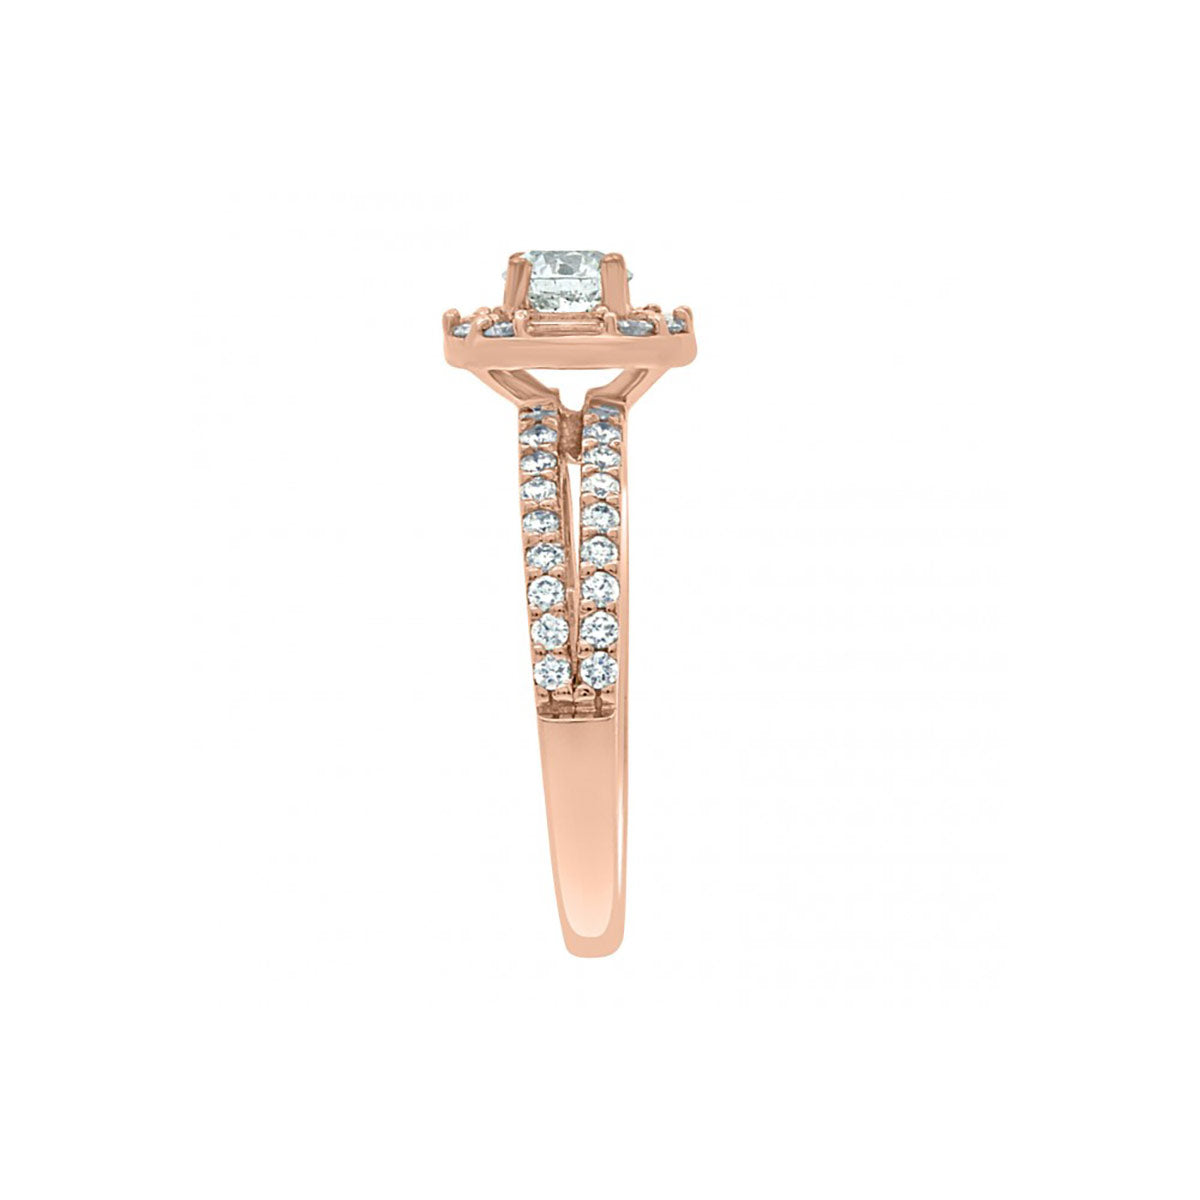 Baguette and Round Diamond Engagement Ring in rose gold pictured in an end view